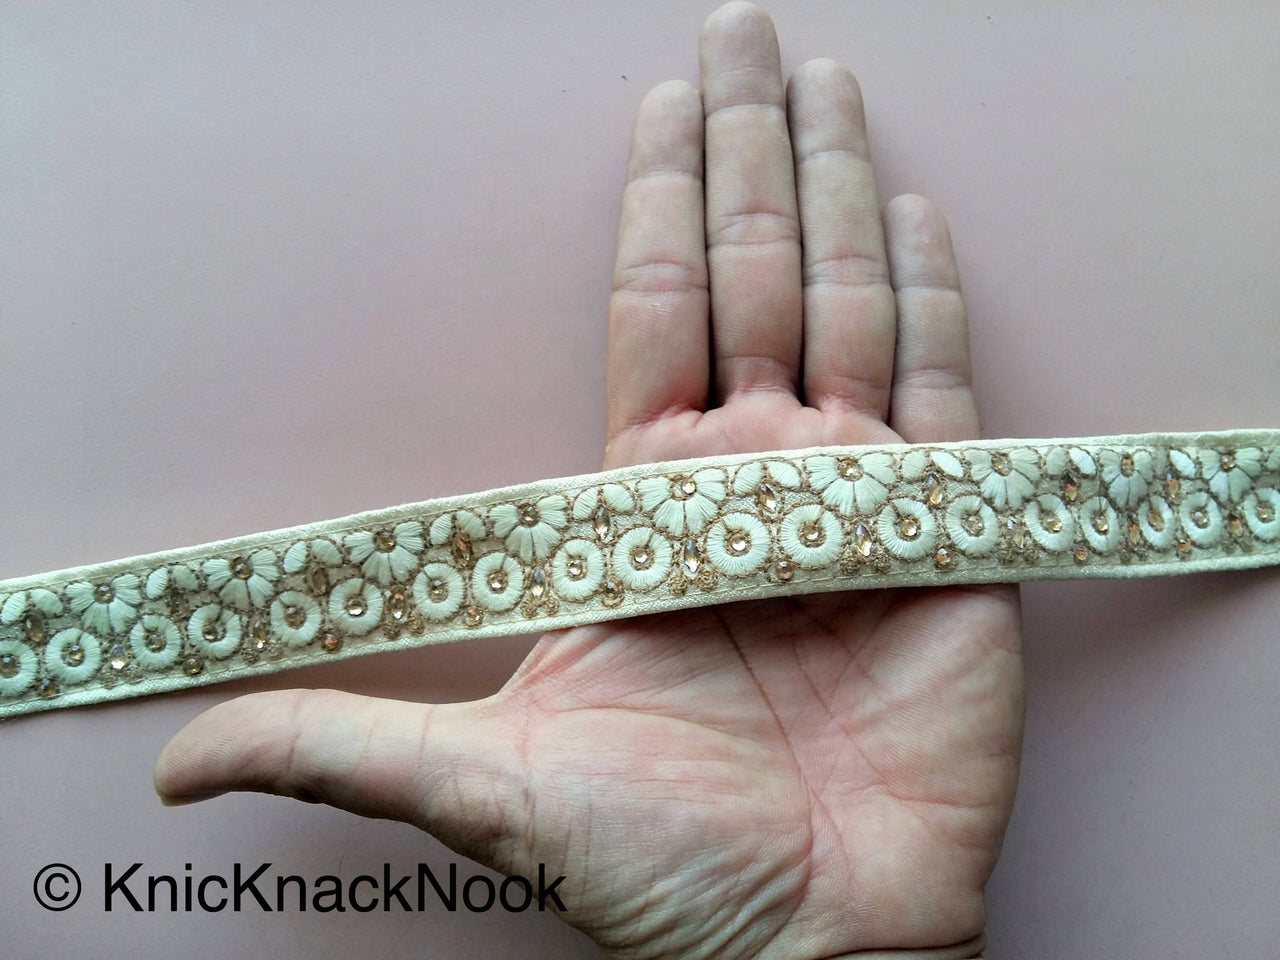 Beige Fabric Trim With Beige / Brown Floral Embroidery With Beads - 200317L457 / 458Trim